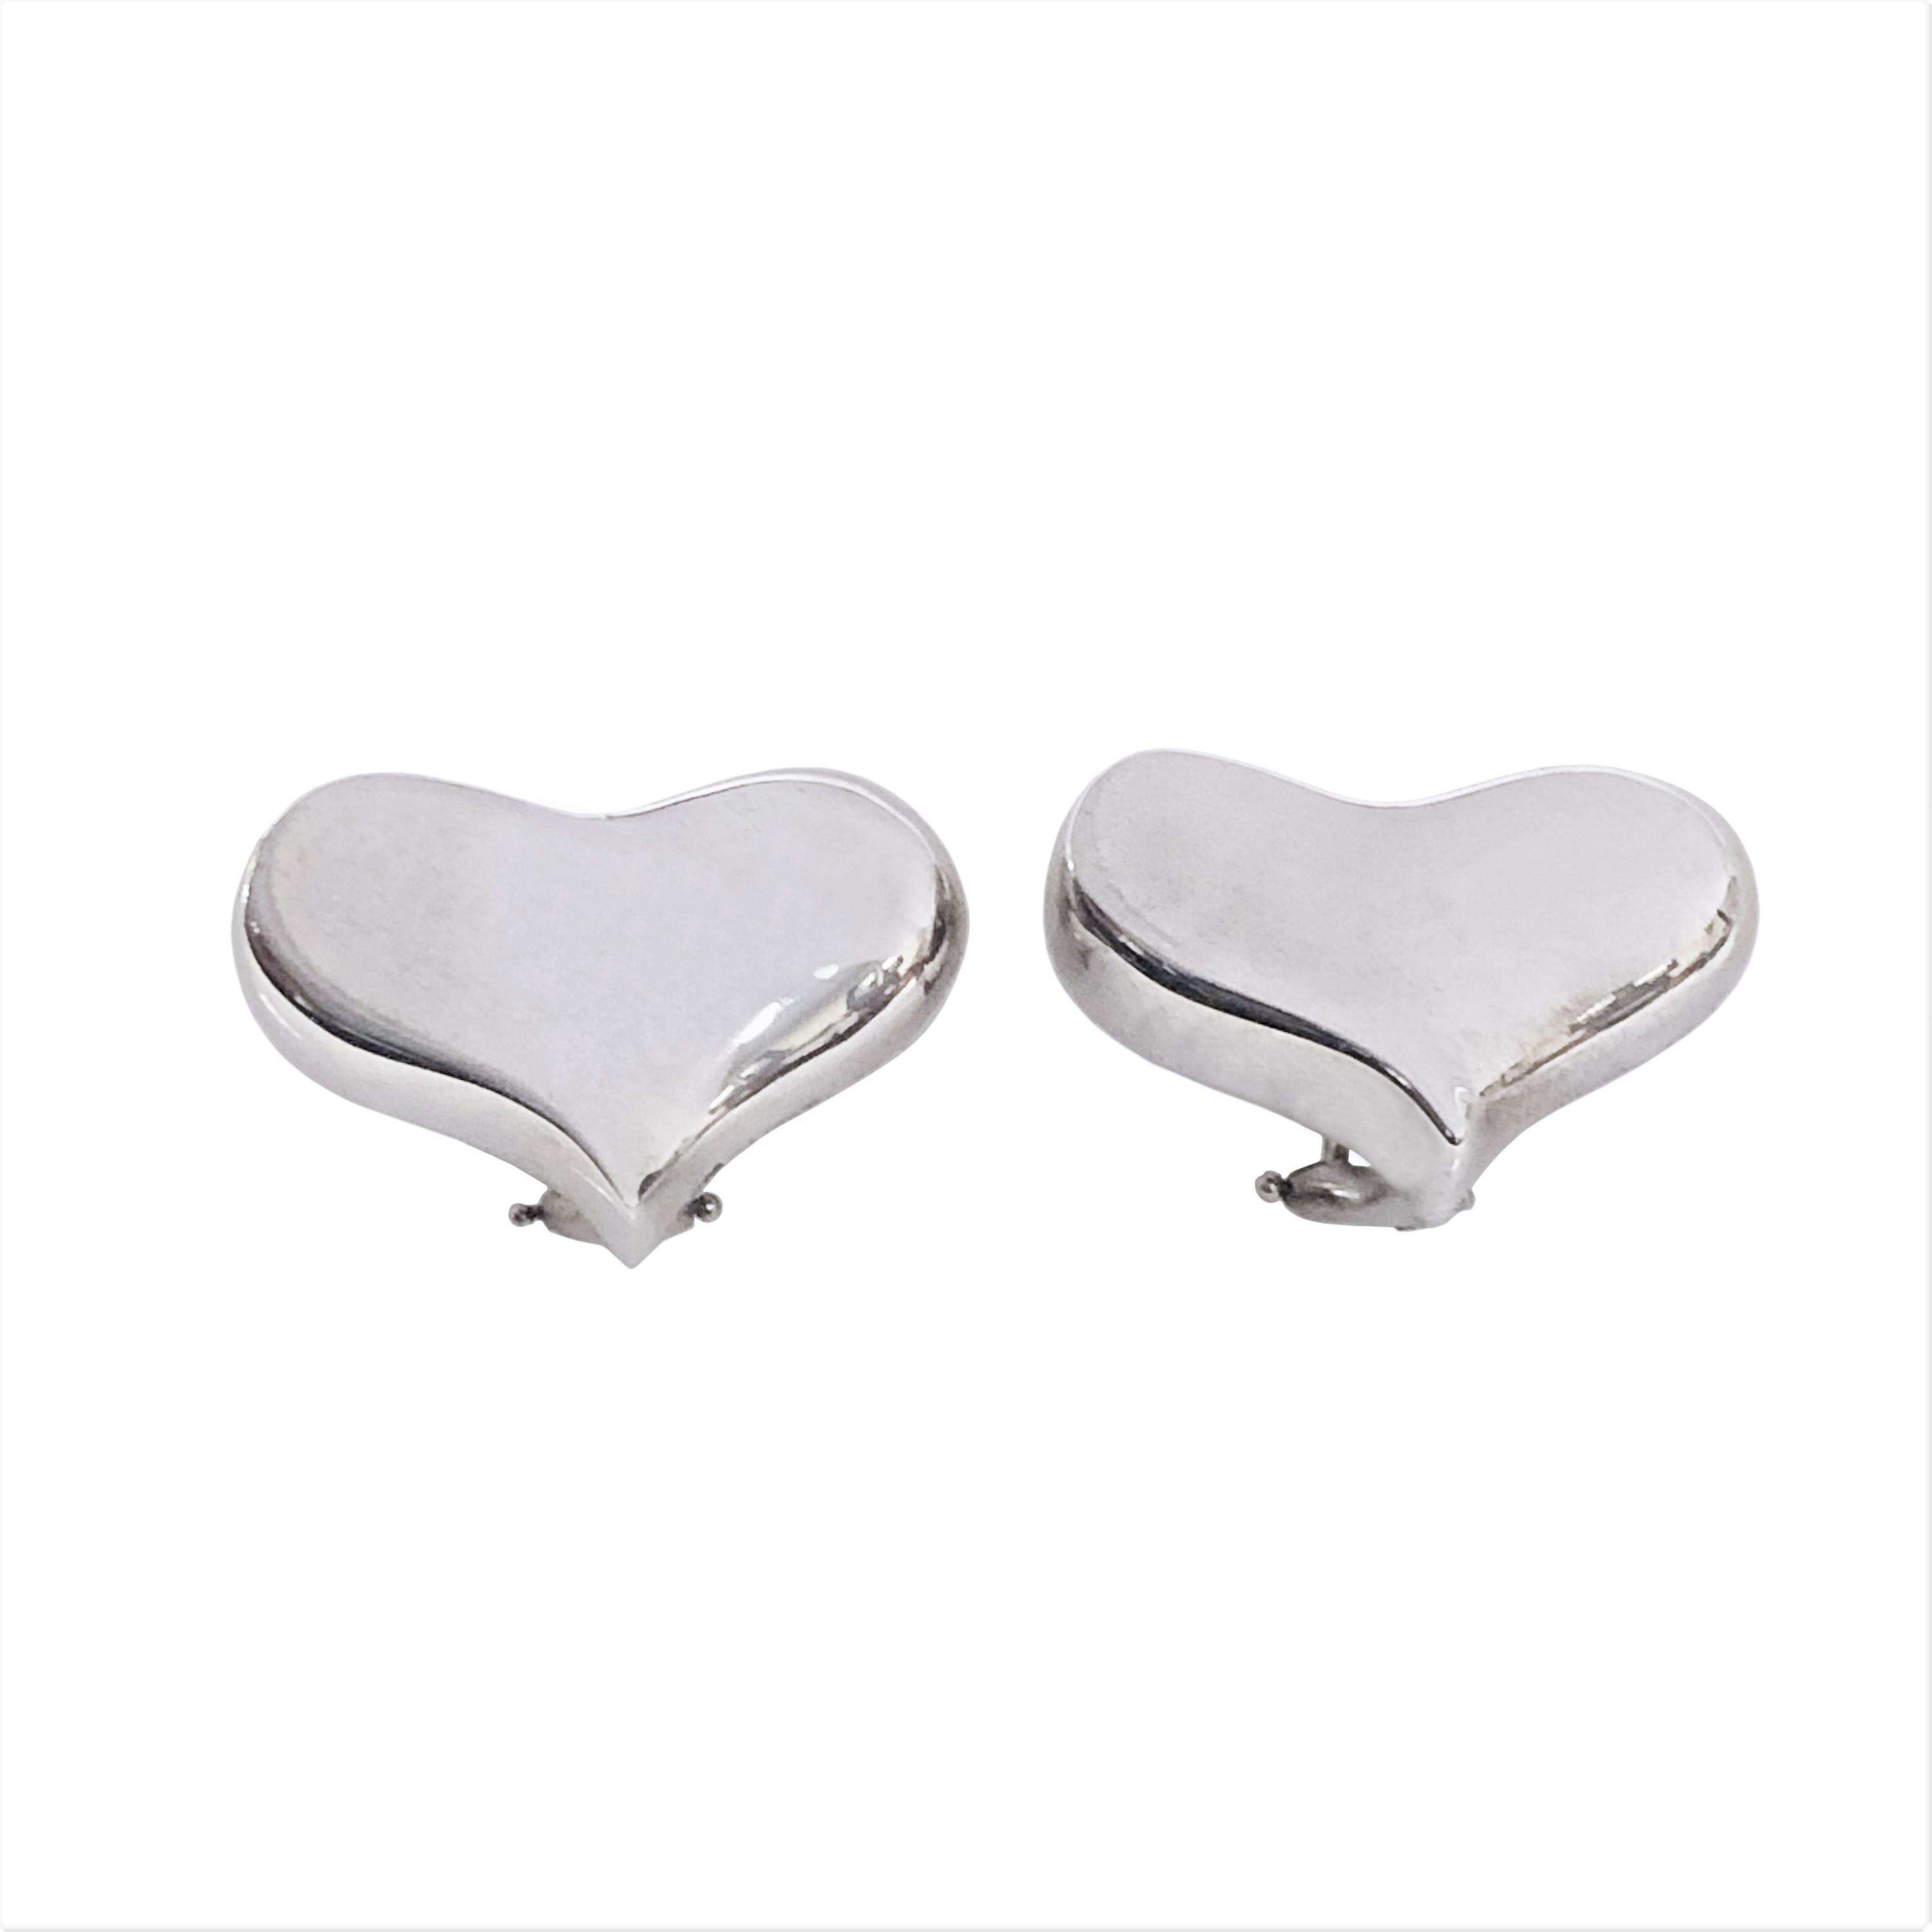 Circa 1980s Angela Cummings Sterling Silver Heart Earrings, measuring 1 X 5/8 inch, having Omega Clip Backs a with a Post. Comes in Original Felt travel pouch. Excellent near unworn condition. 